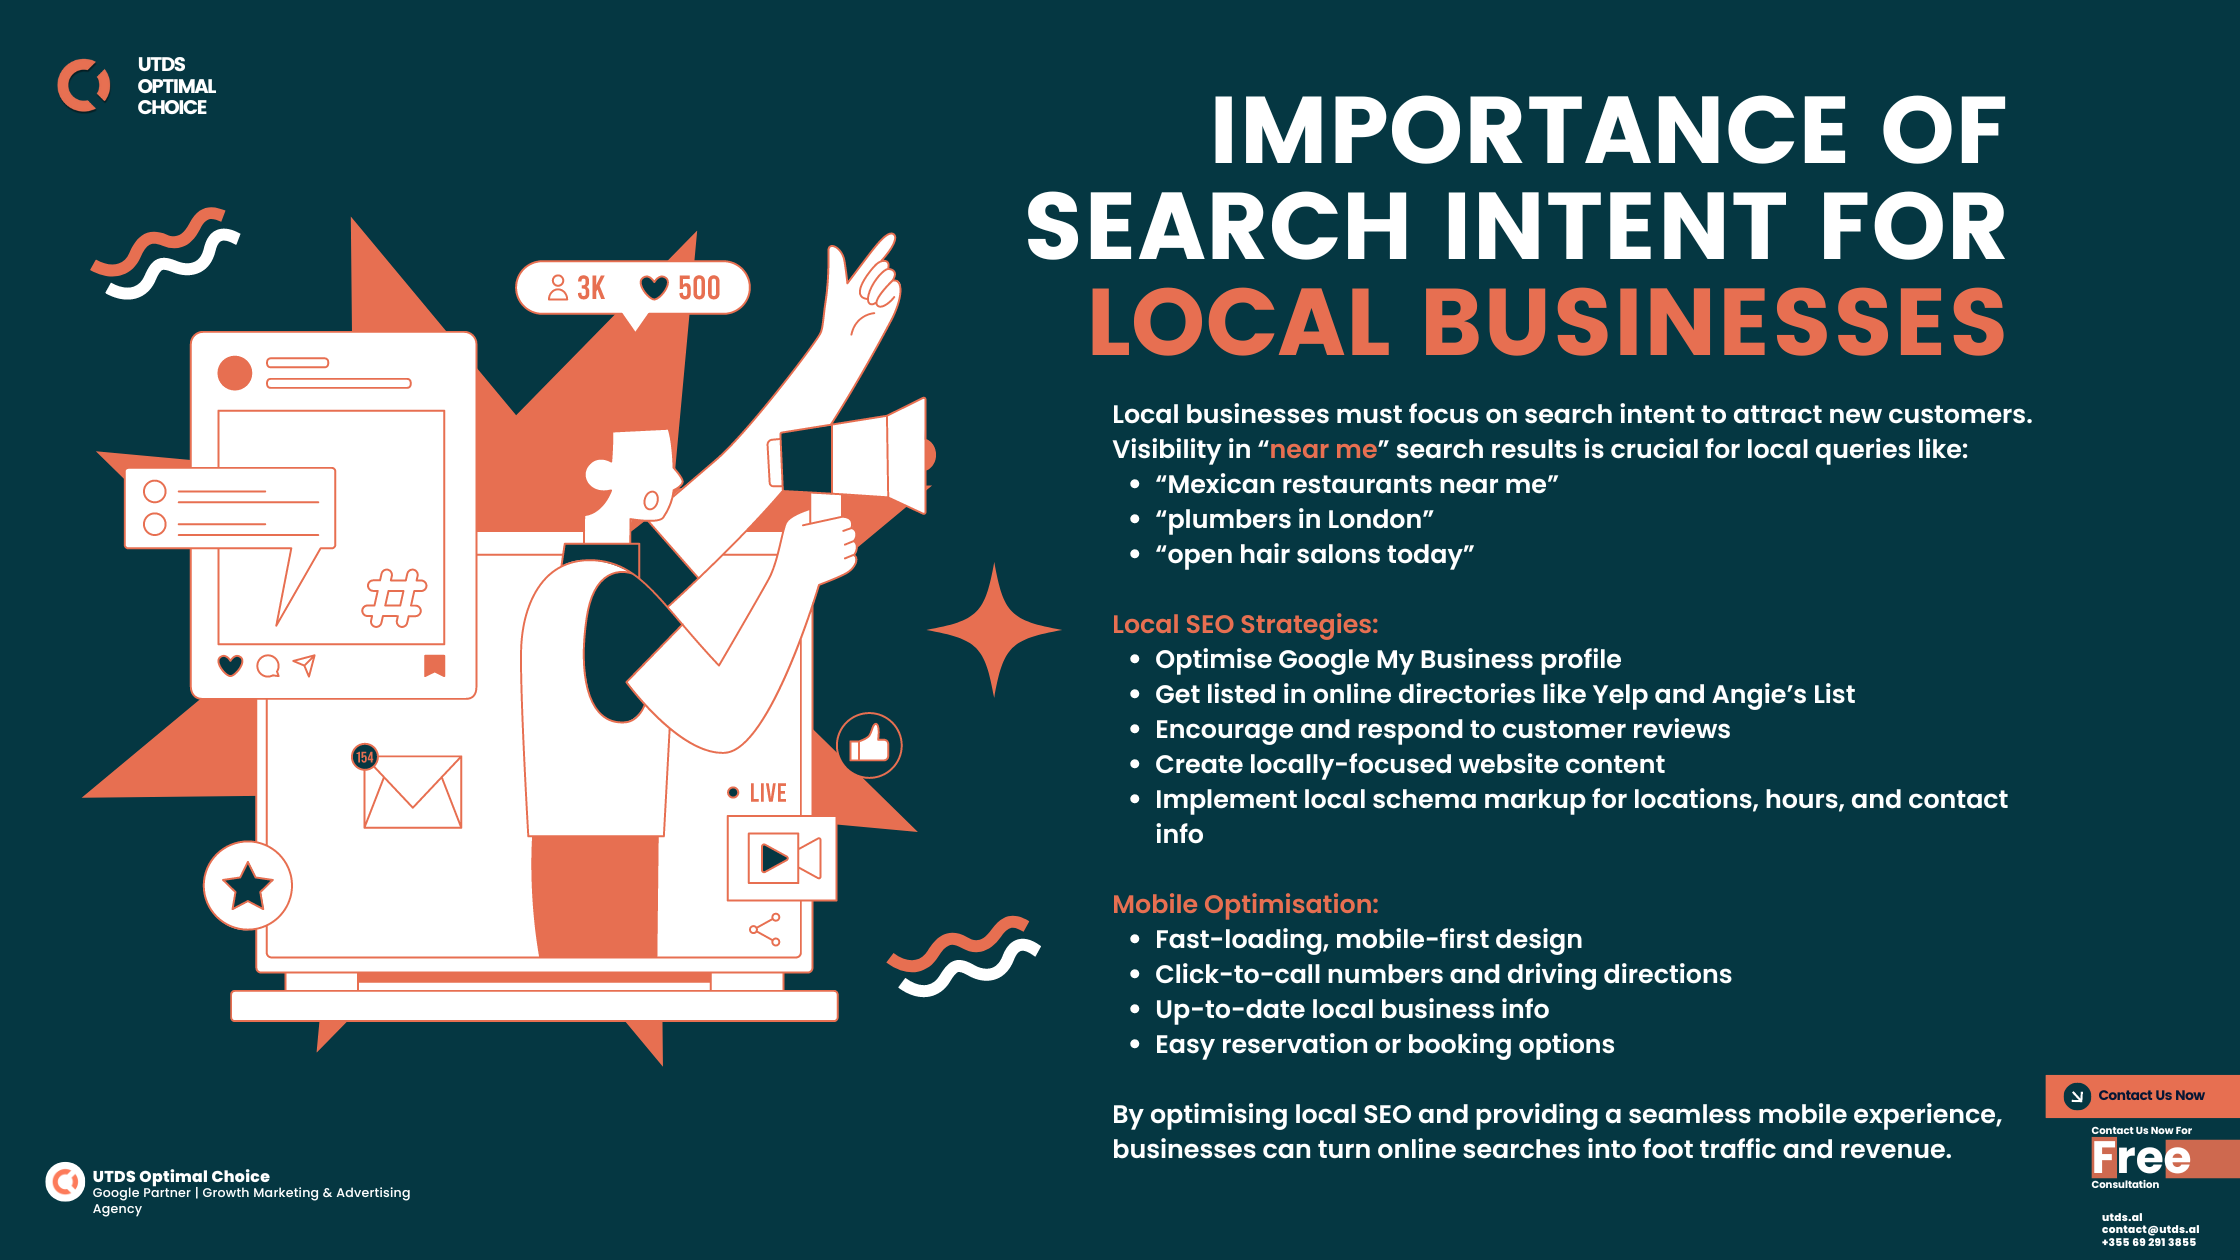 Importance of Search Intent for Local Businesses